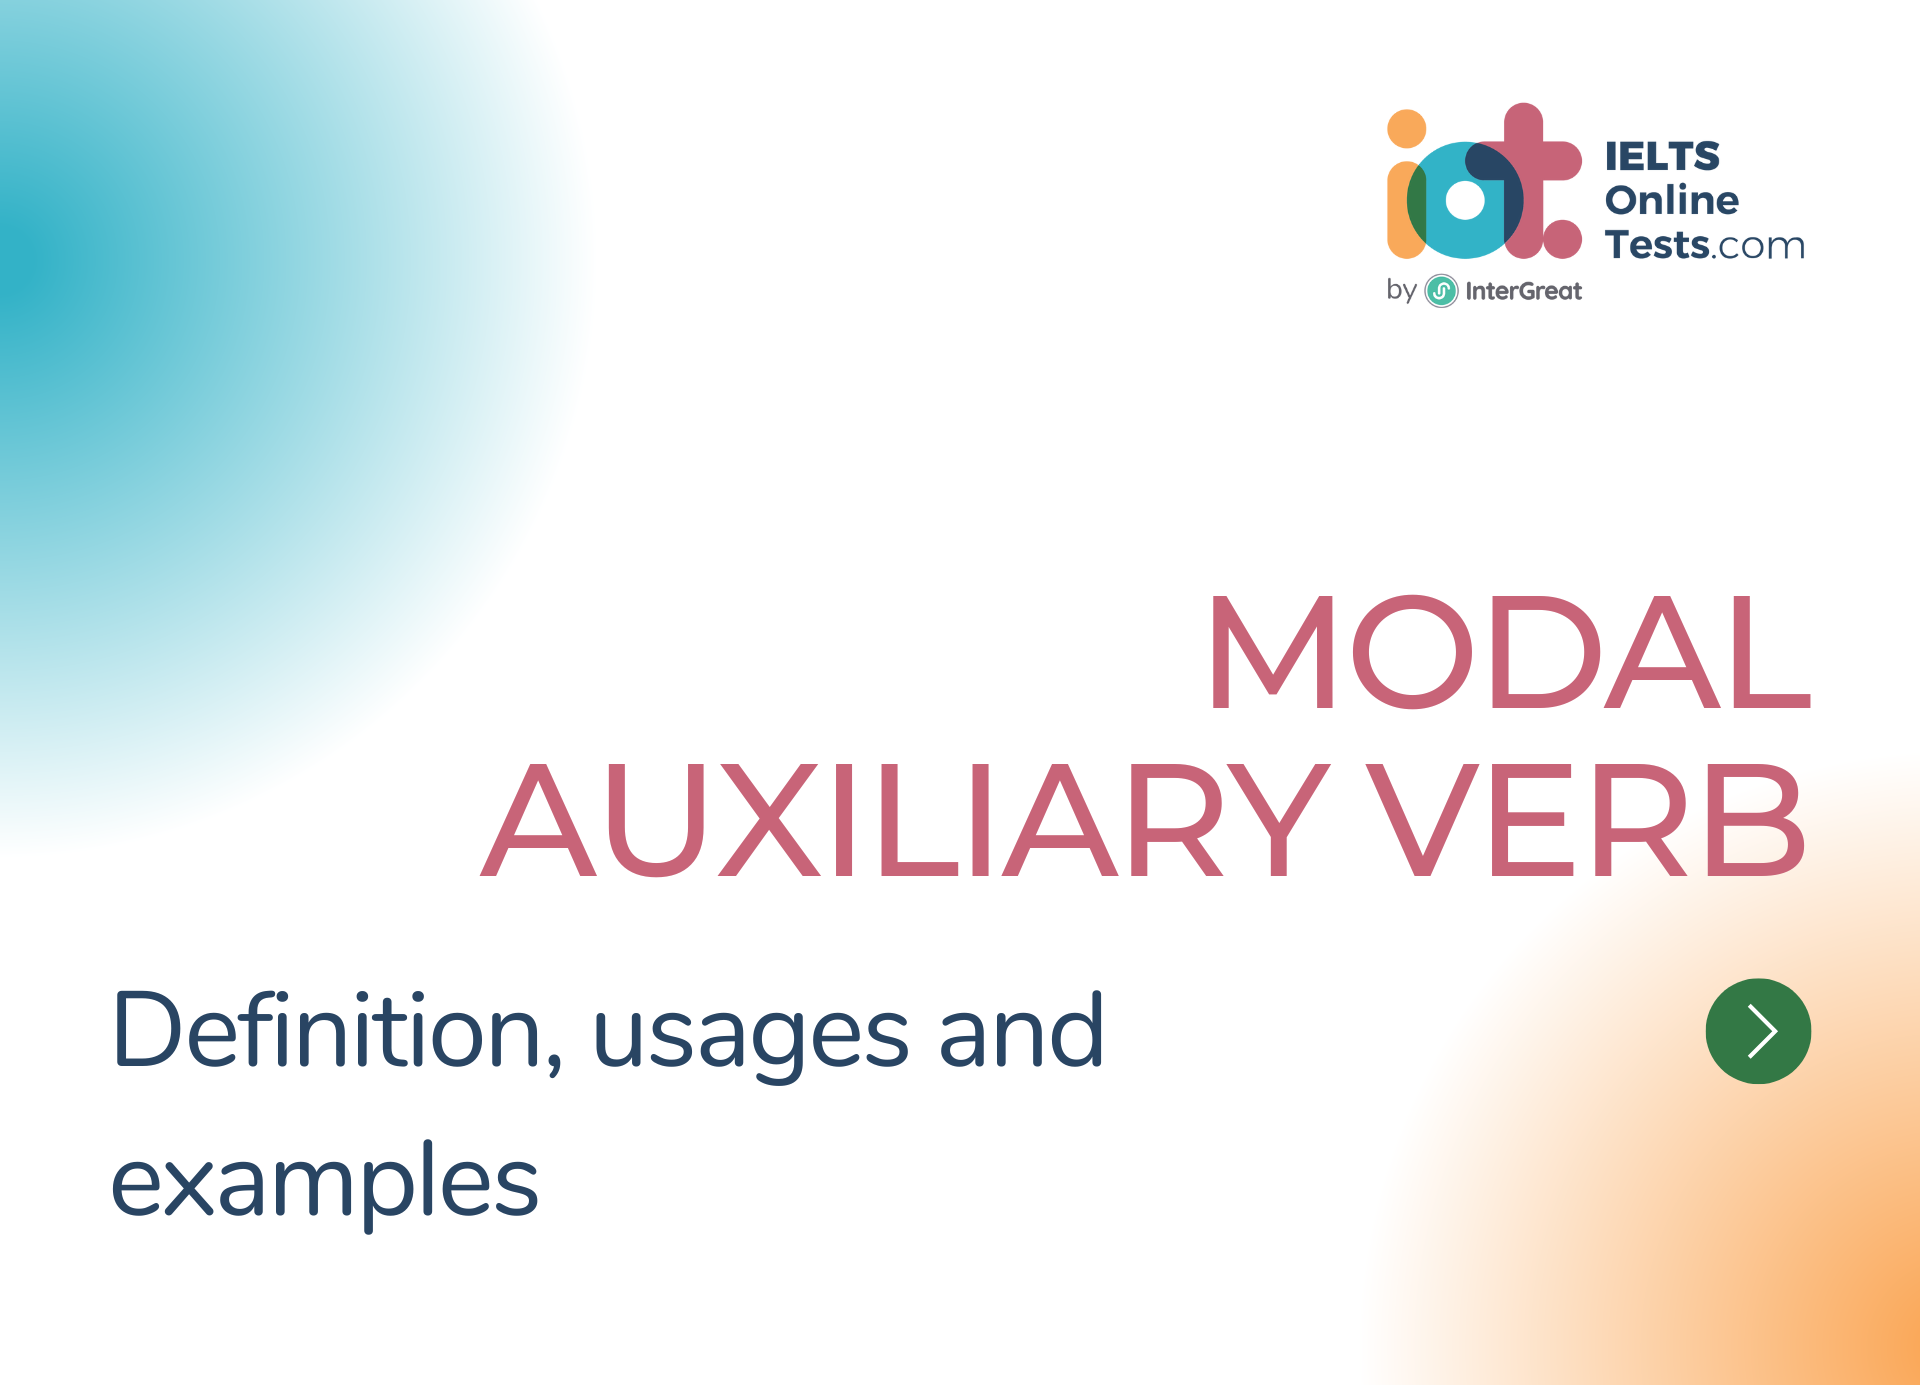 Modal auxiliary verb definition and examples